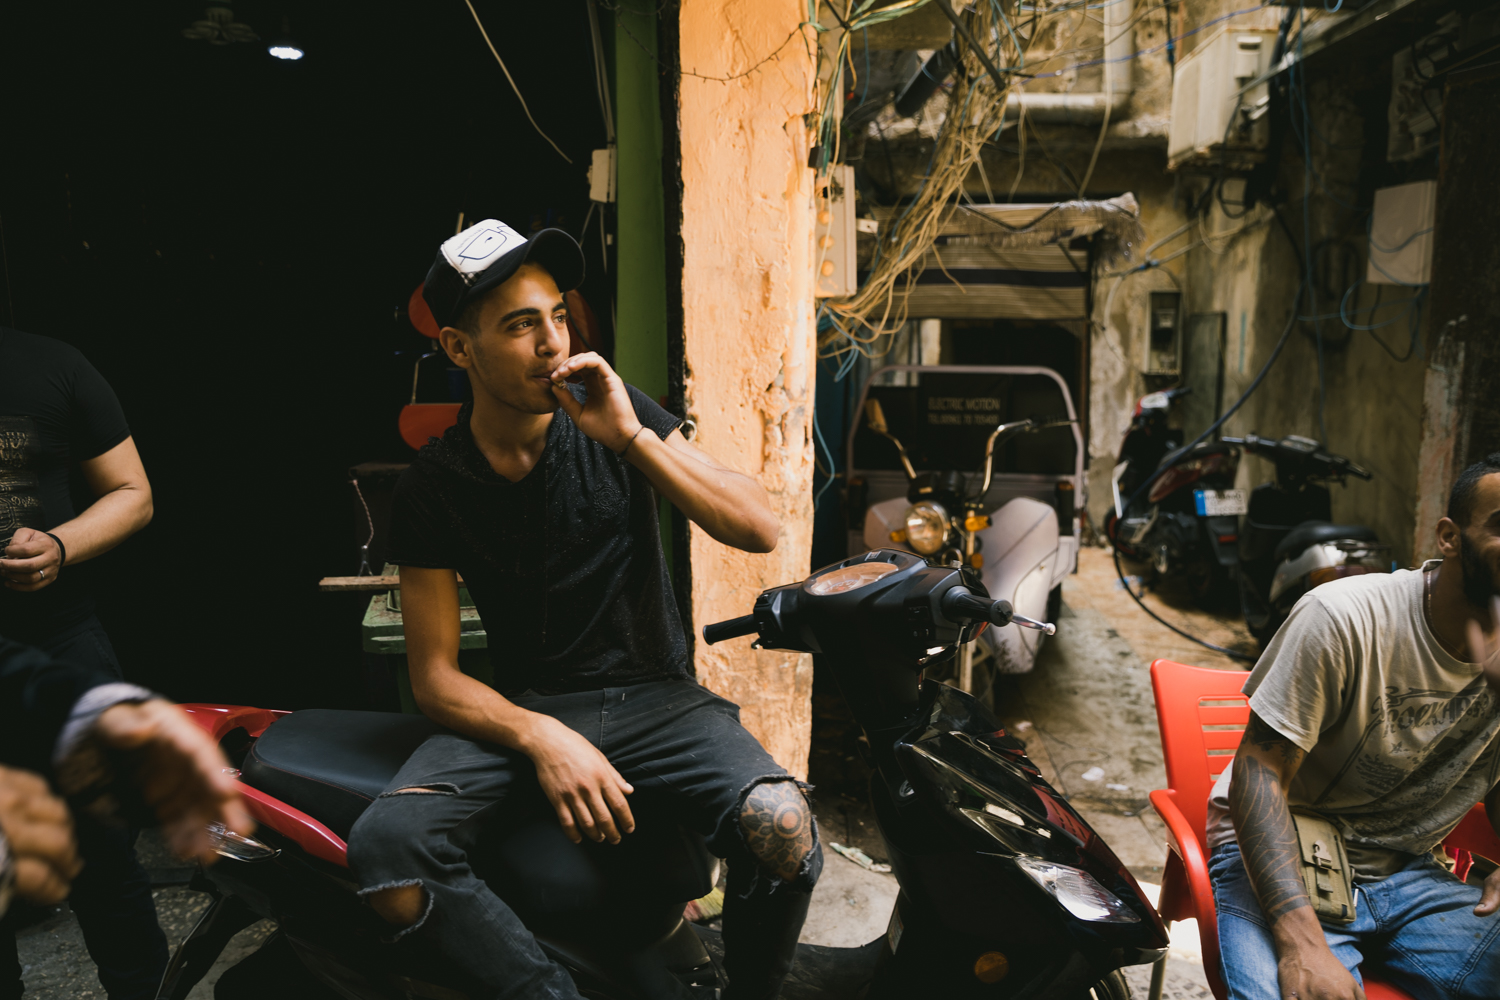  A young Palestinian man smokes a cigarette while hanging with friends during the middle of the day. Due to complications with the legal and social status of Palestinians in Lebanon, most people in the camps struggle to find work, and thus spend good